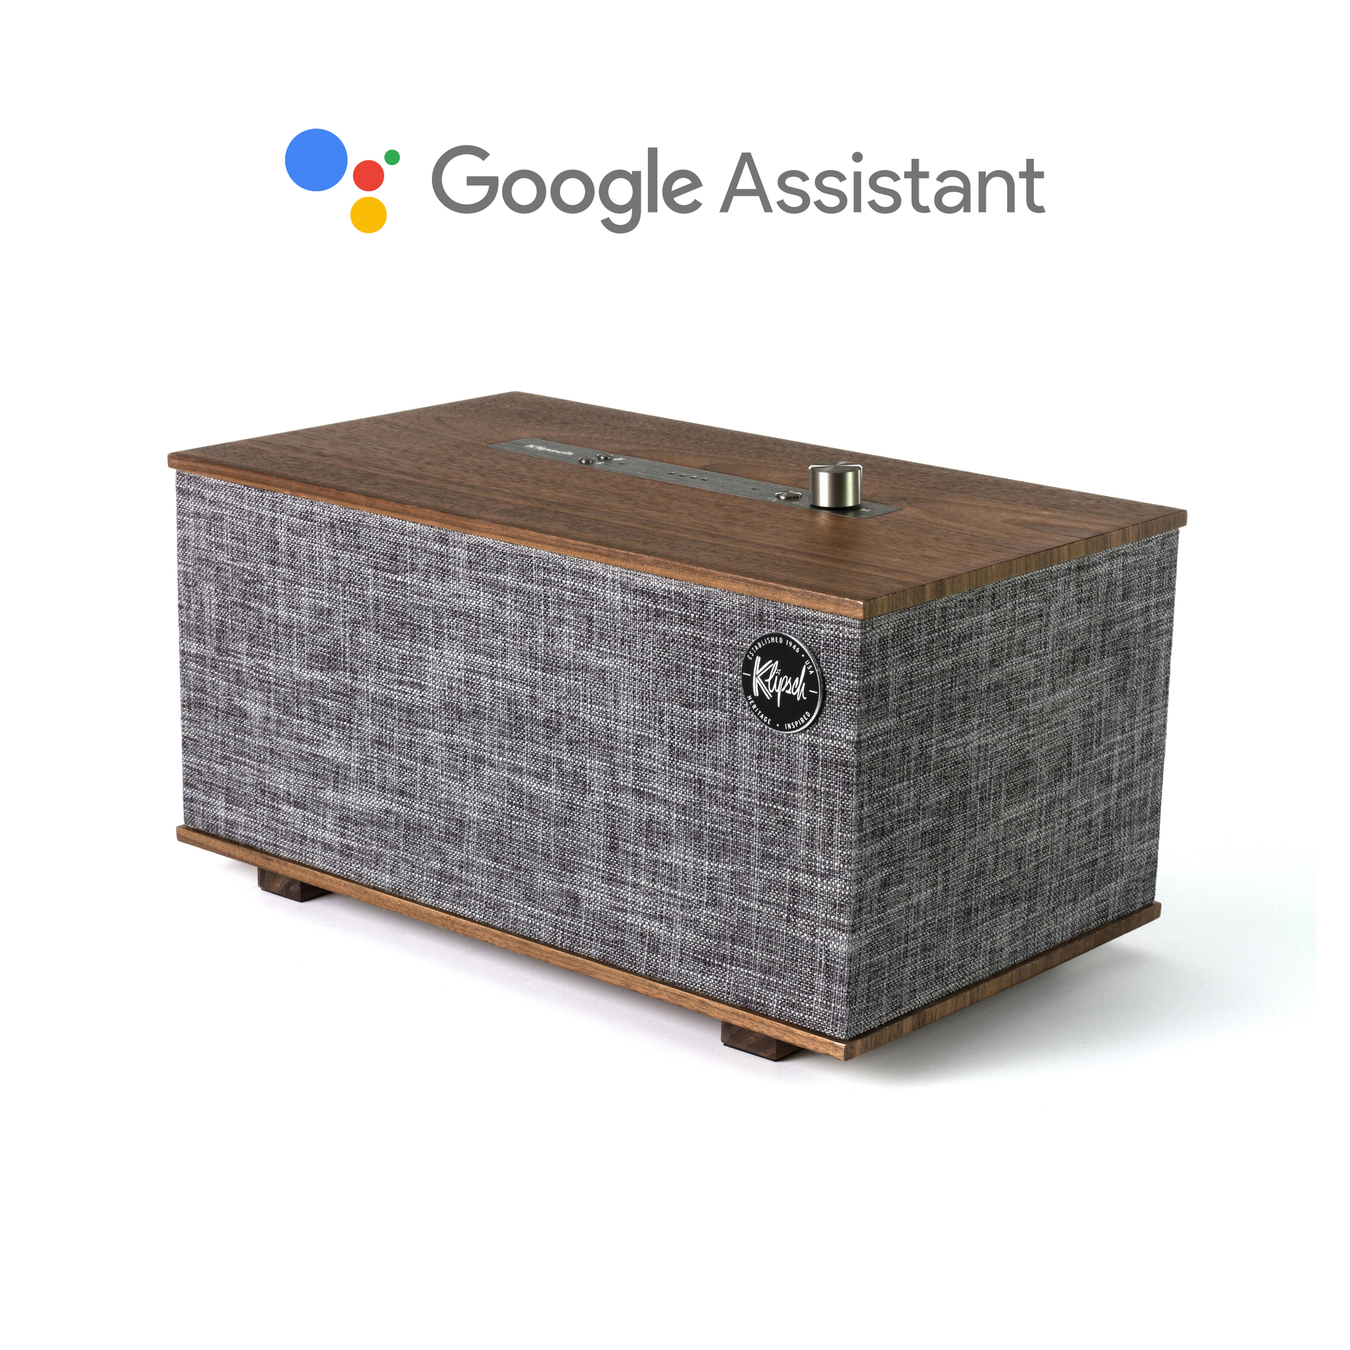 The Three Google Assistant